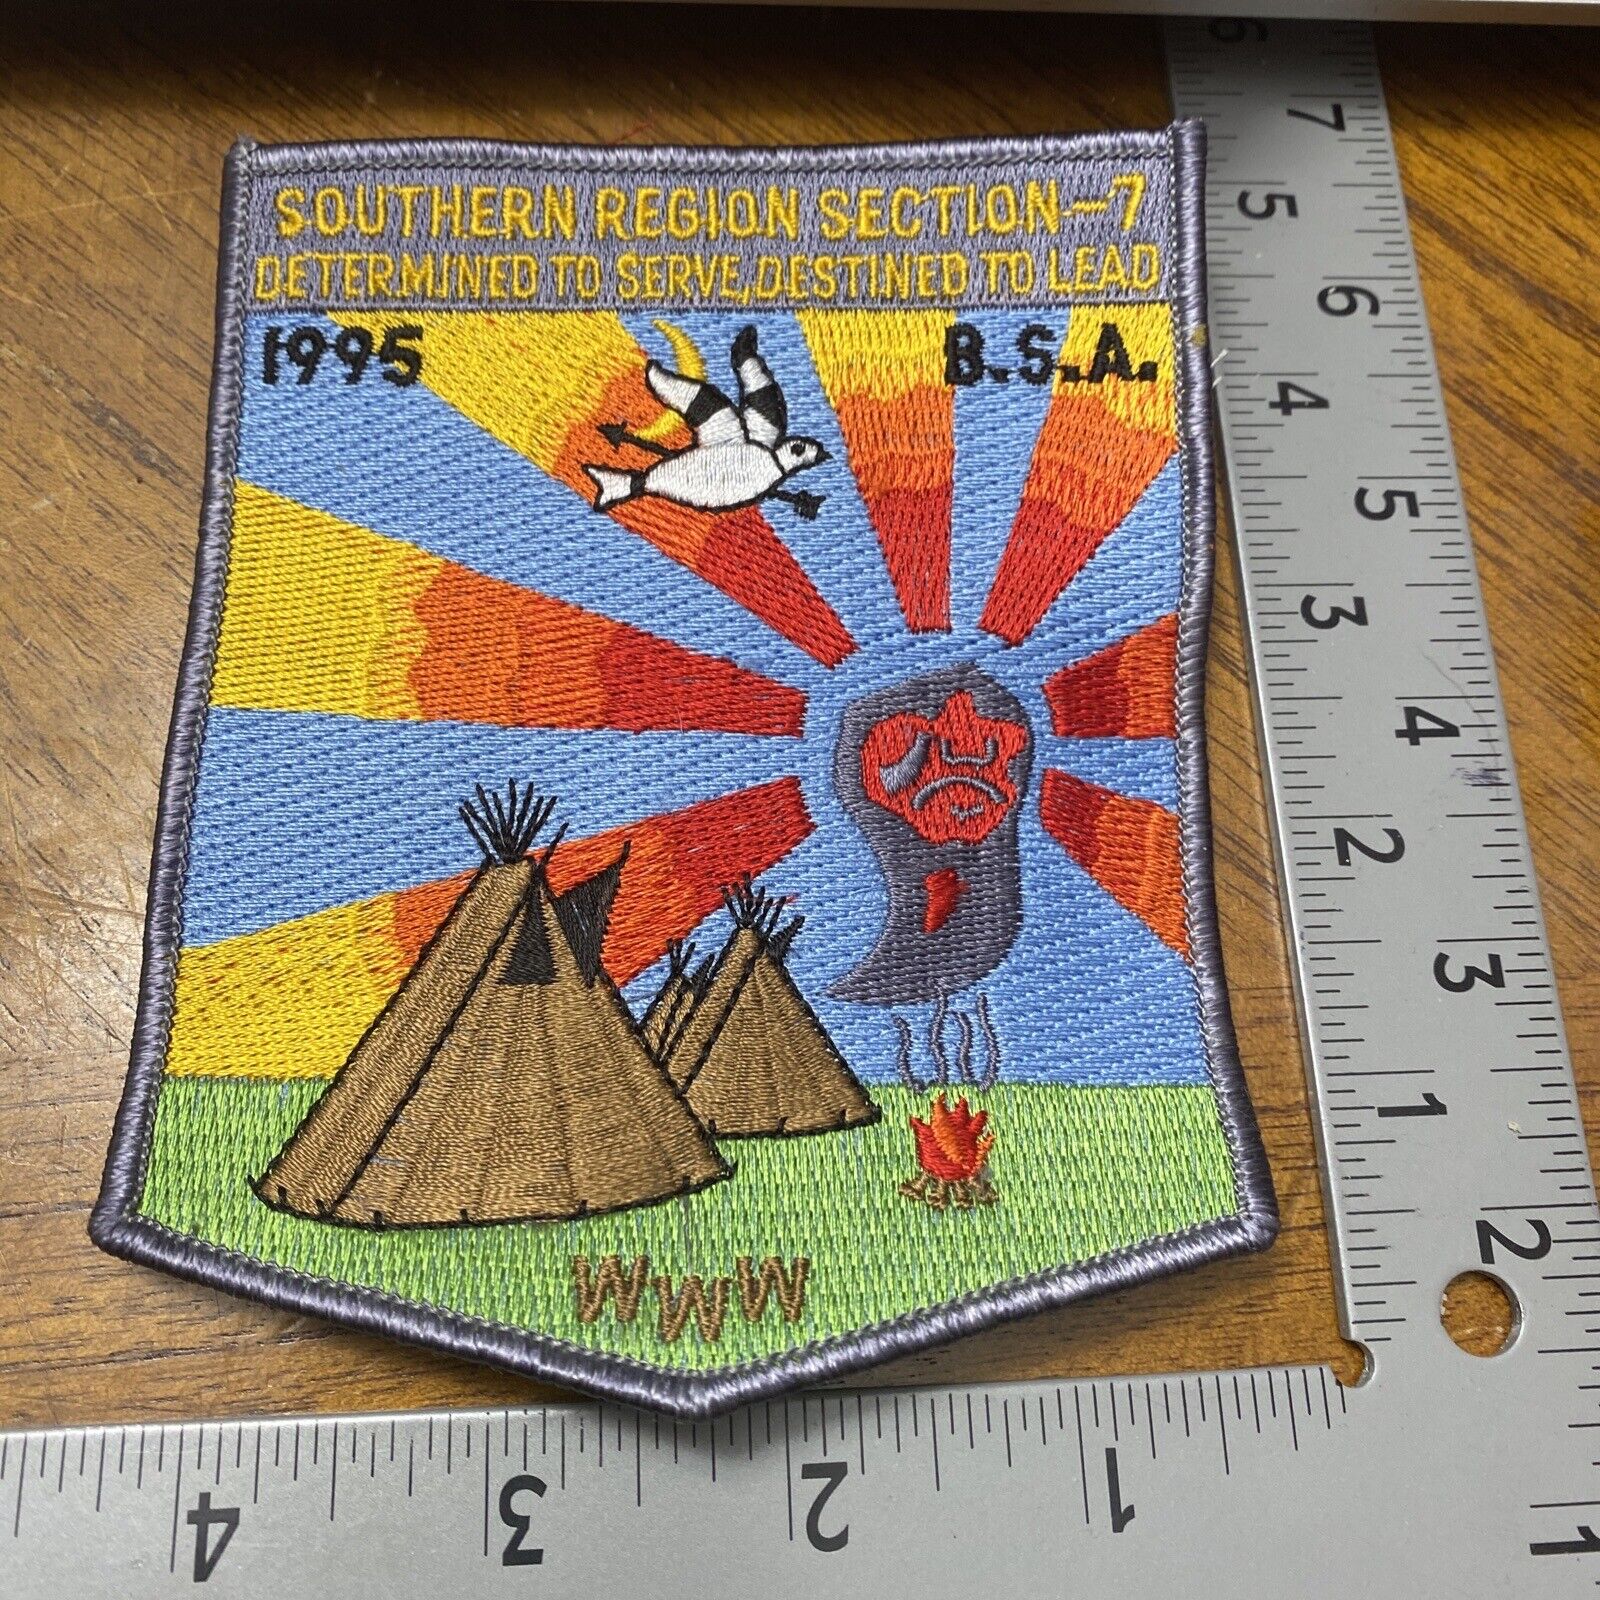 1995 Southern Region Section 7 SR-7 Conclave OA Order of the Arrow 38E-1004V